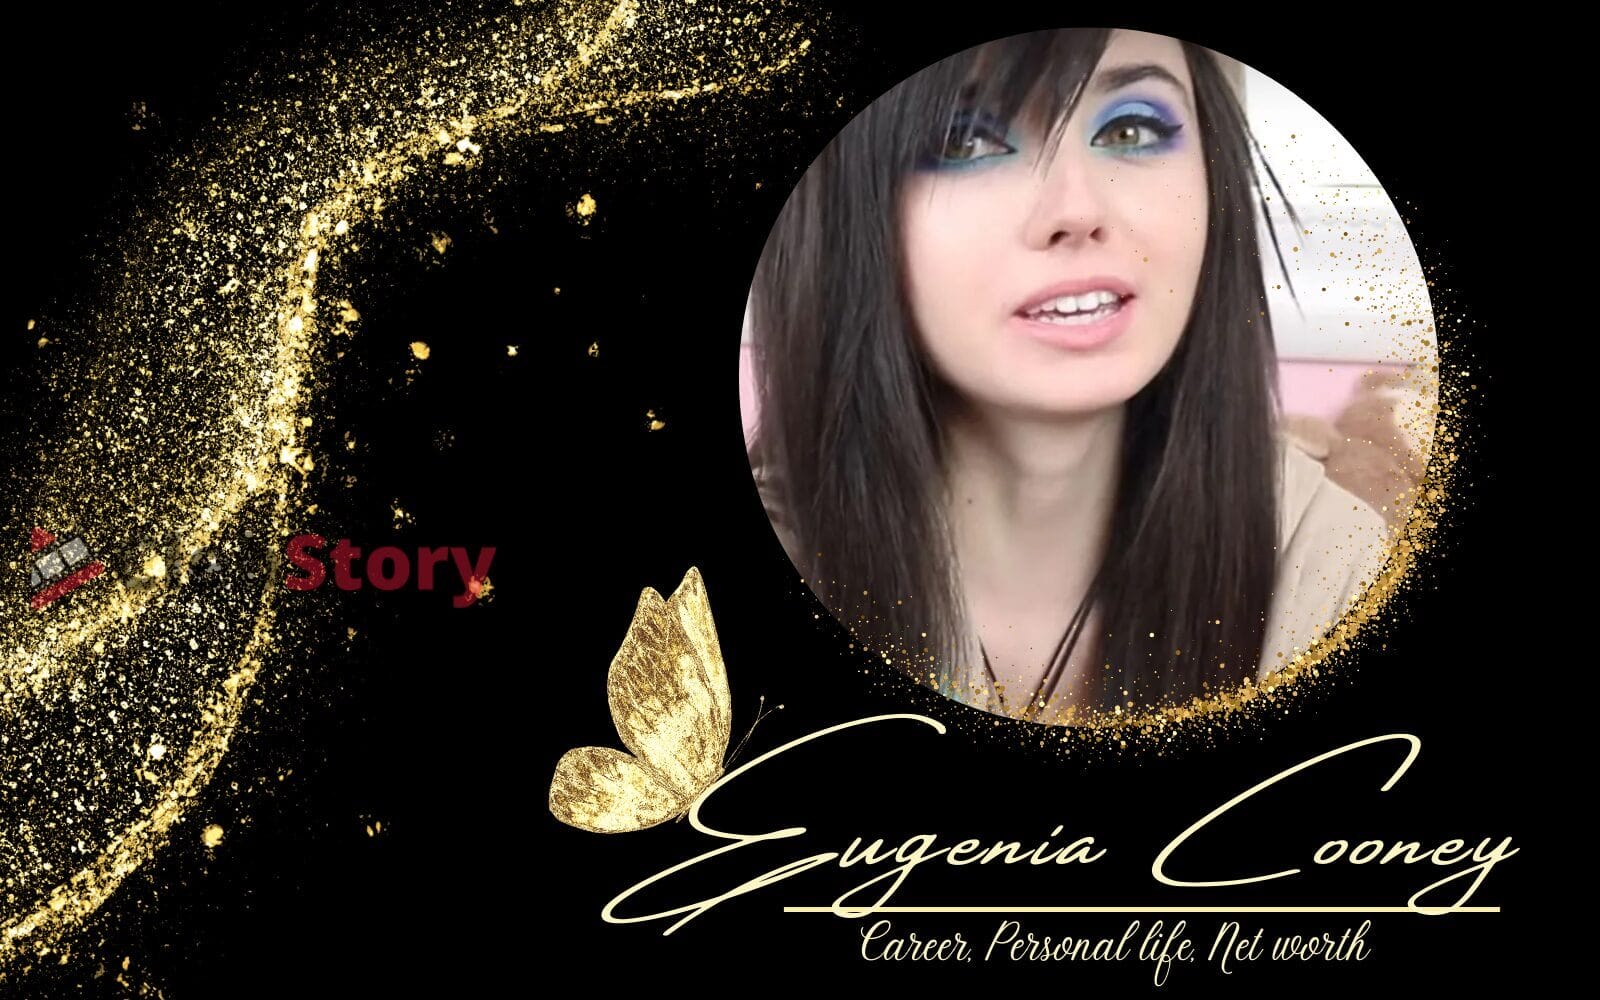 who is Eugenia Cooney